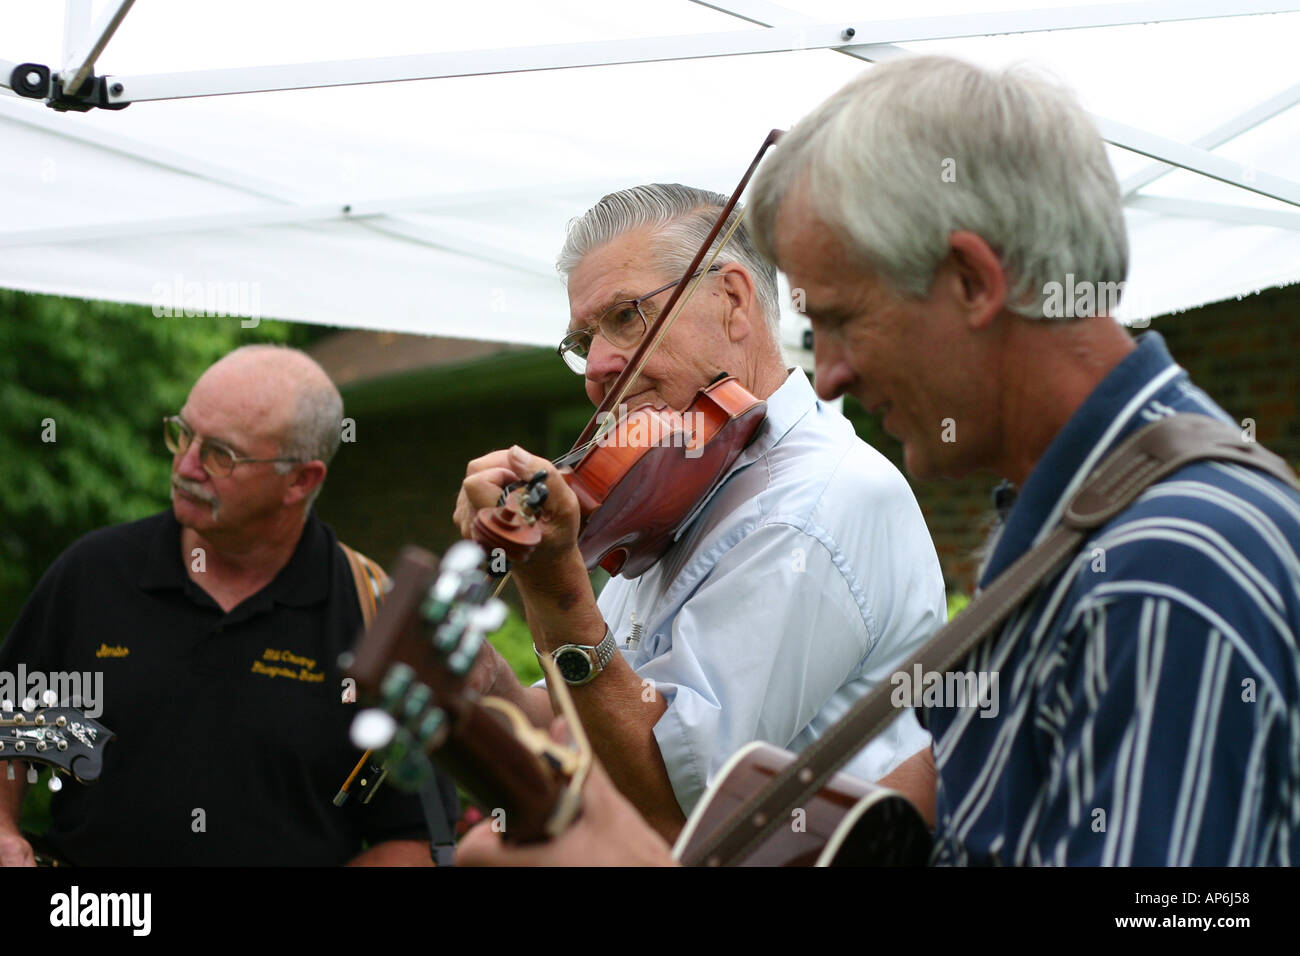 Older men playing the violin under a tent at a wedding Stock Photo